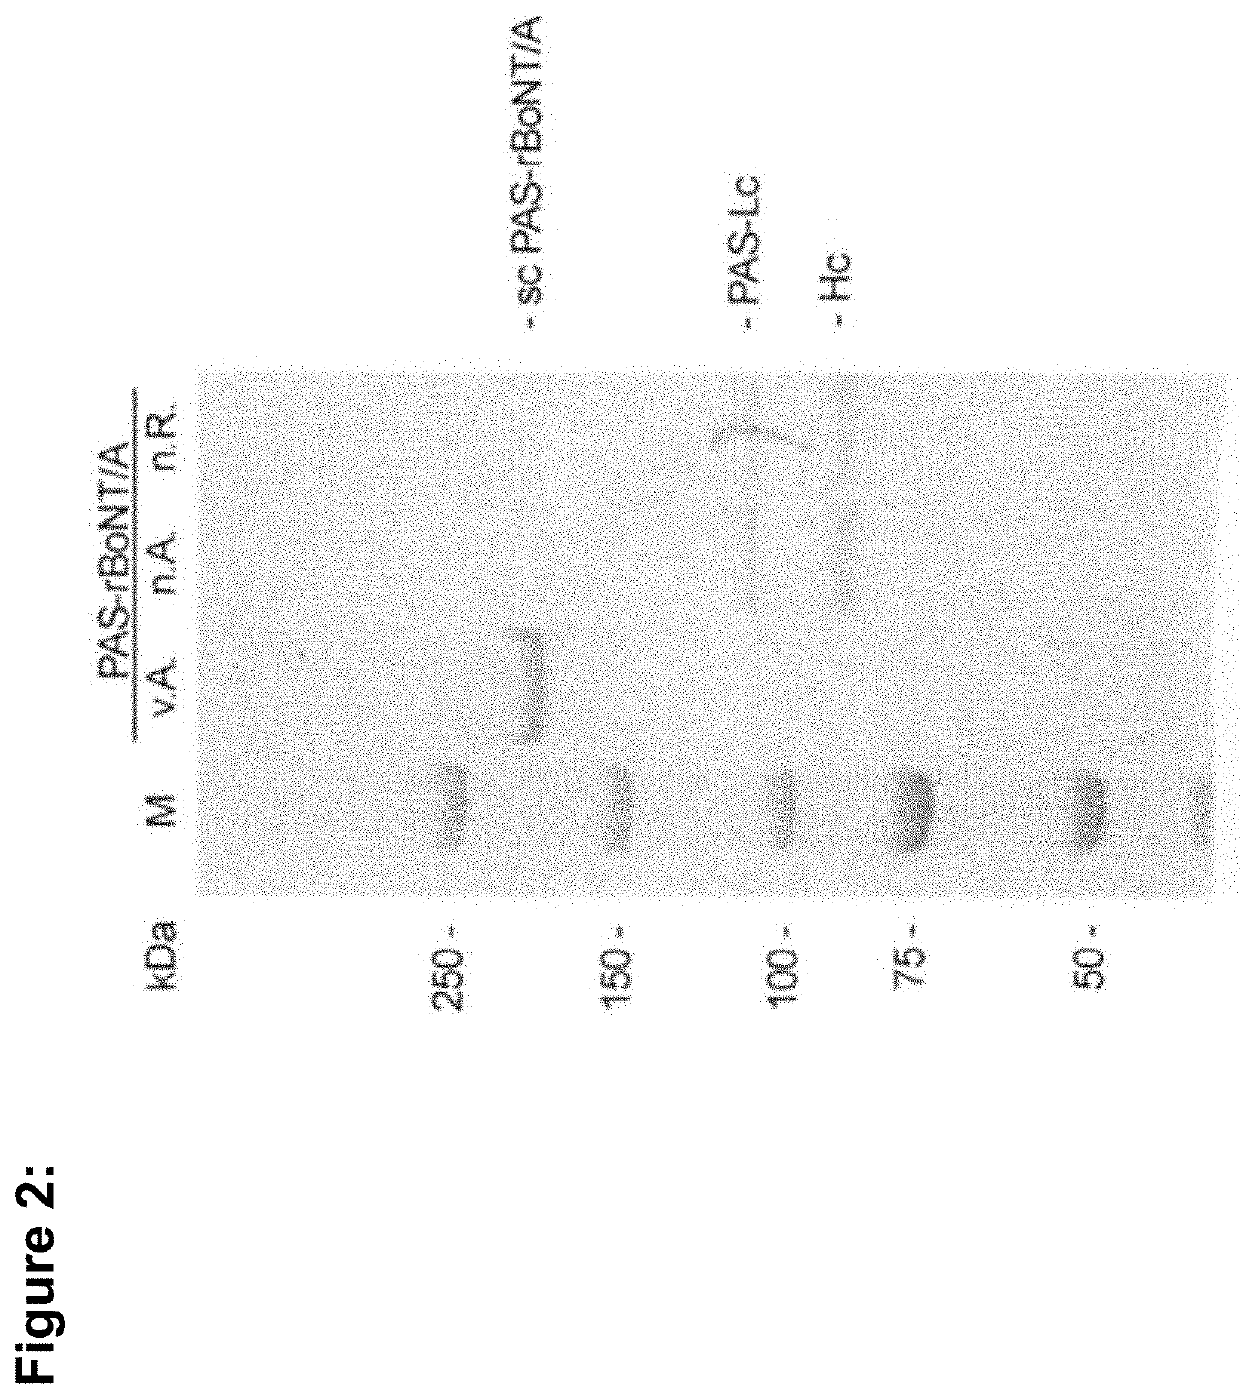 Novel recombinant clostridial neurotoxins with increased duration of effect